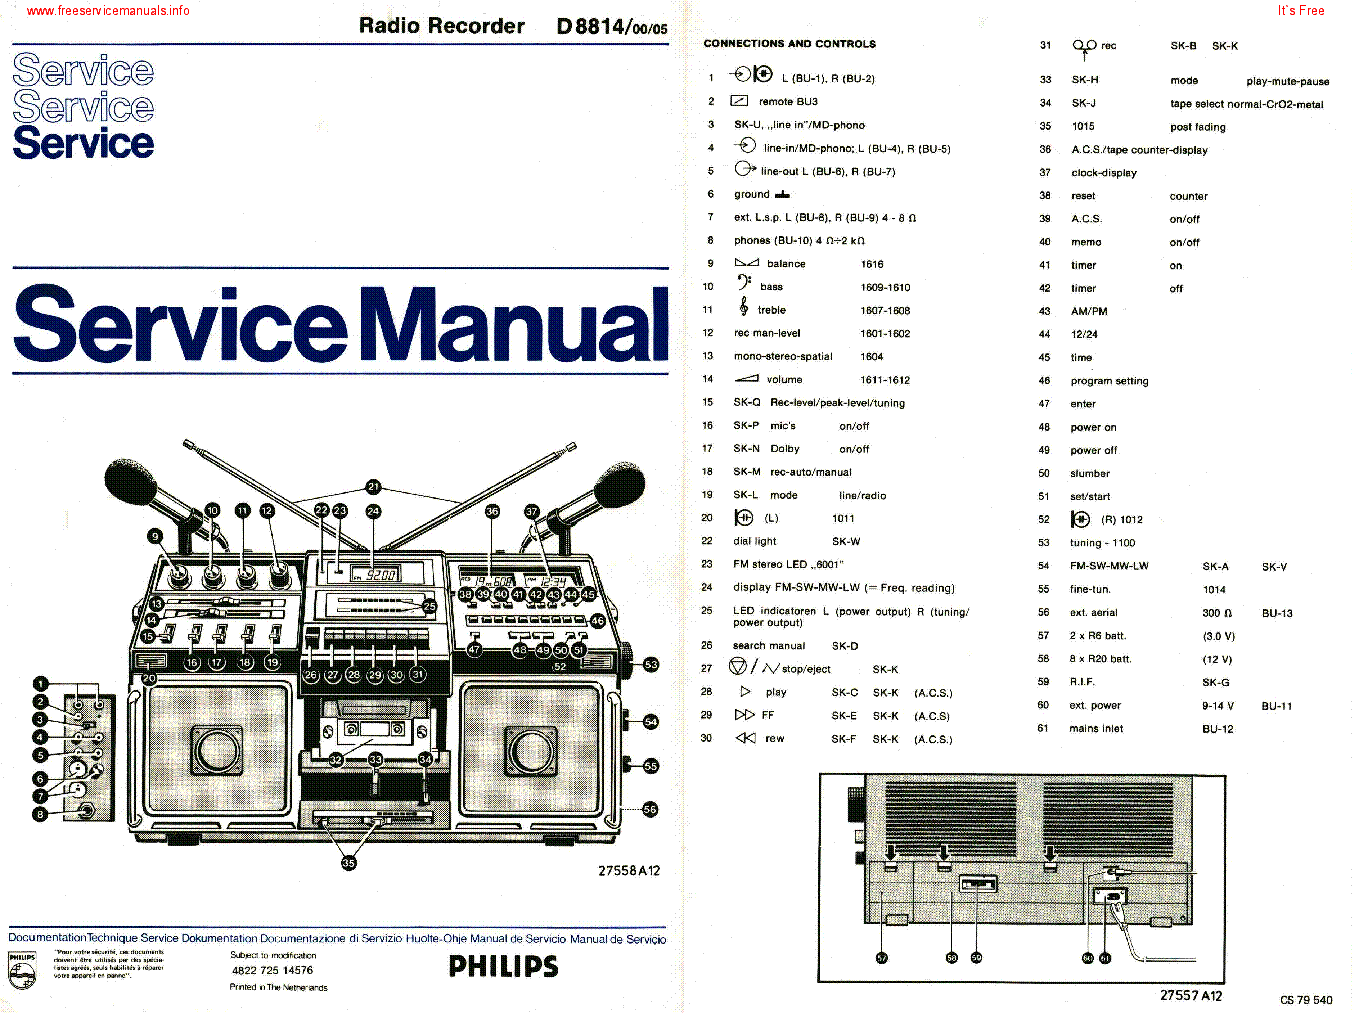 PHILIPS D8814 service manual (1st page)